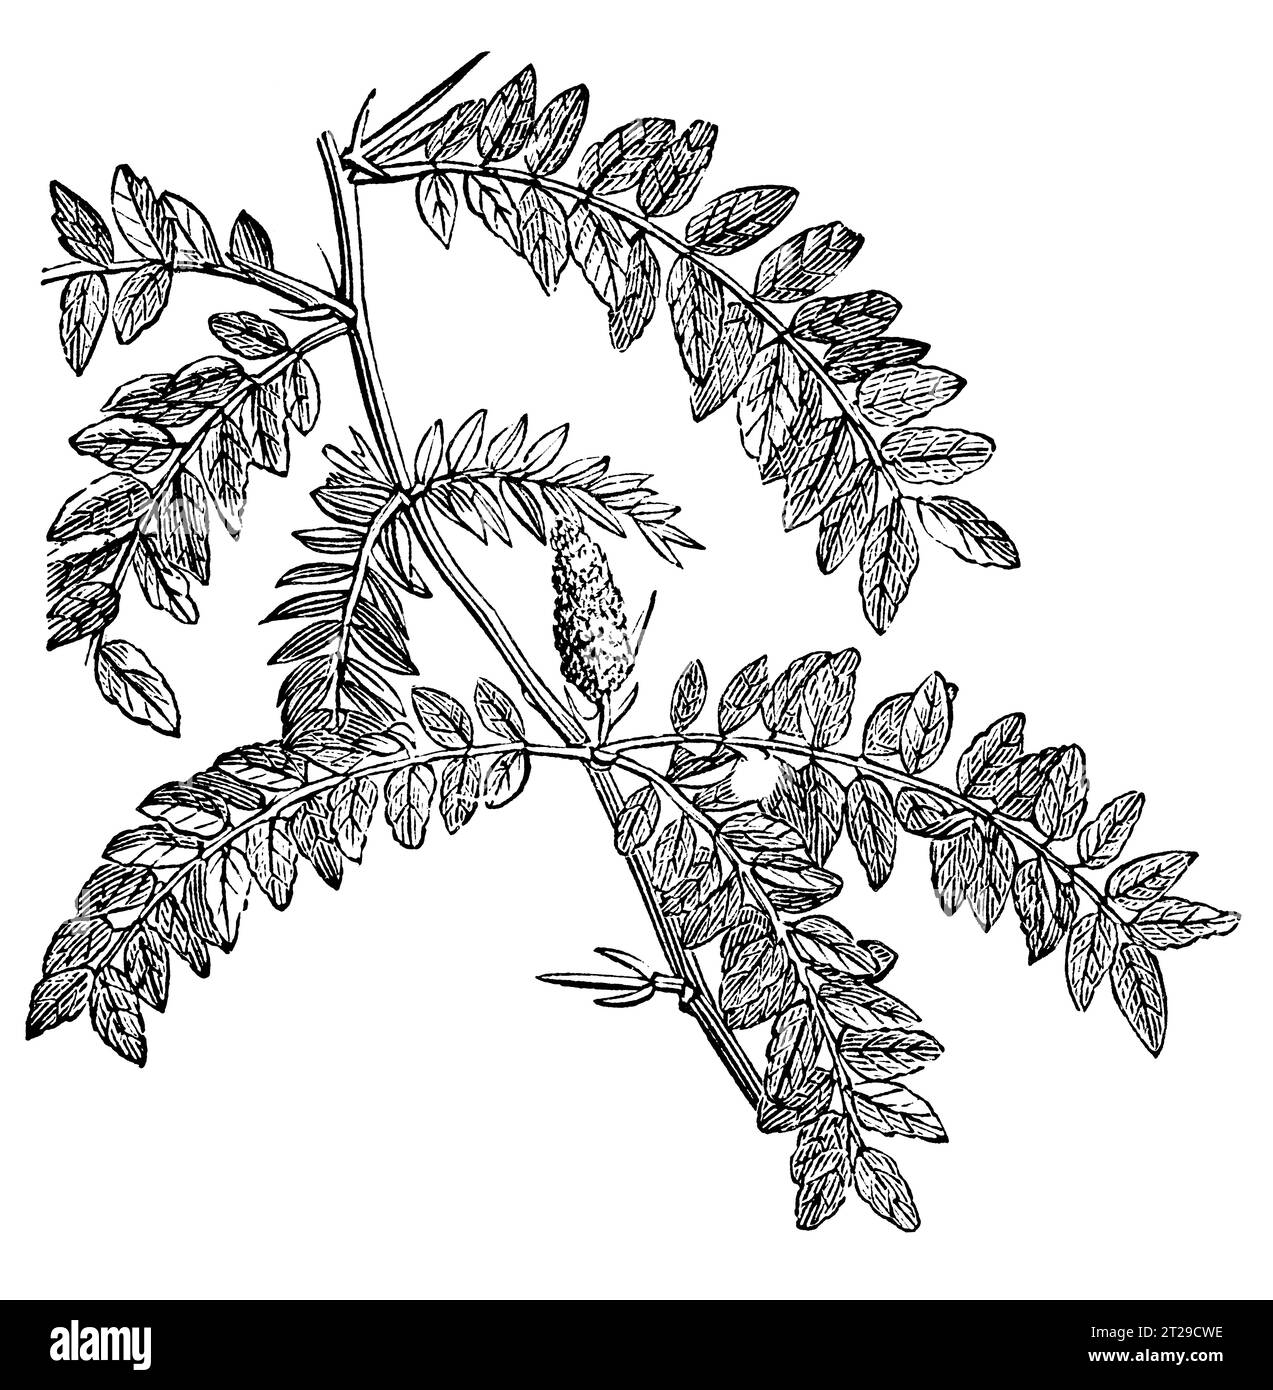 Gleditsia triacanthos, digitally restored from 'The Condensed American Encyclopedia' published in 1882. Stock Photo